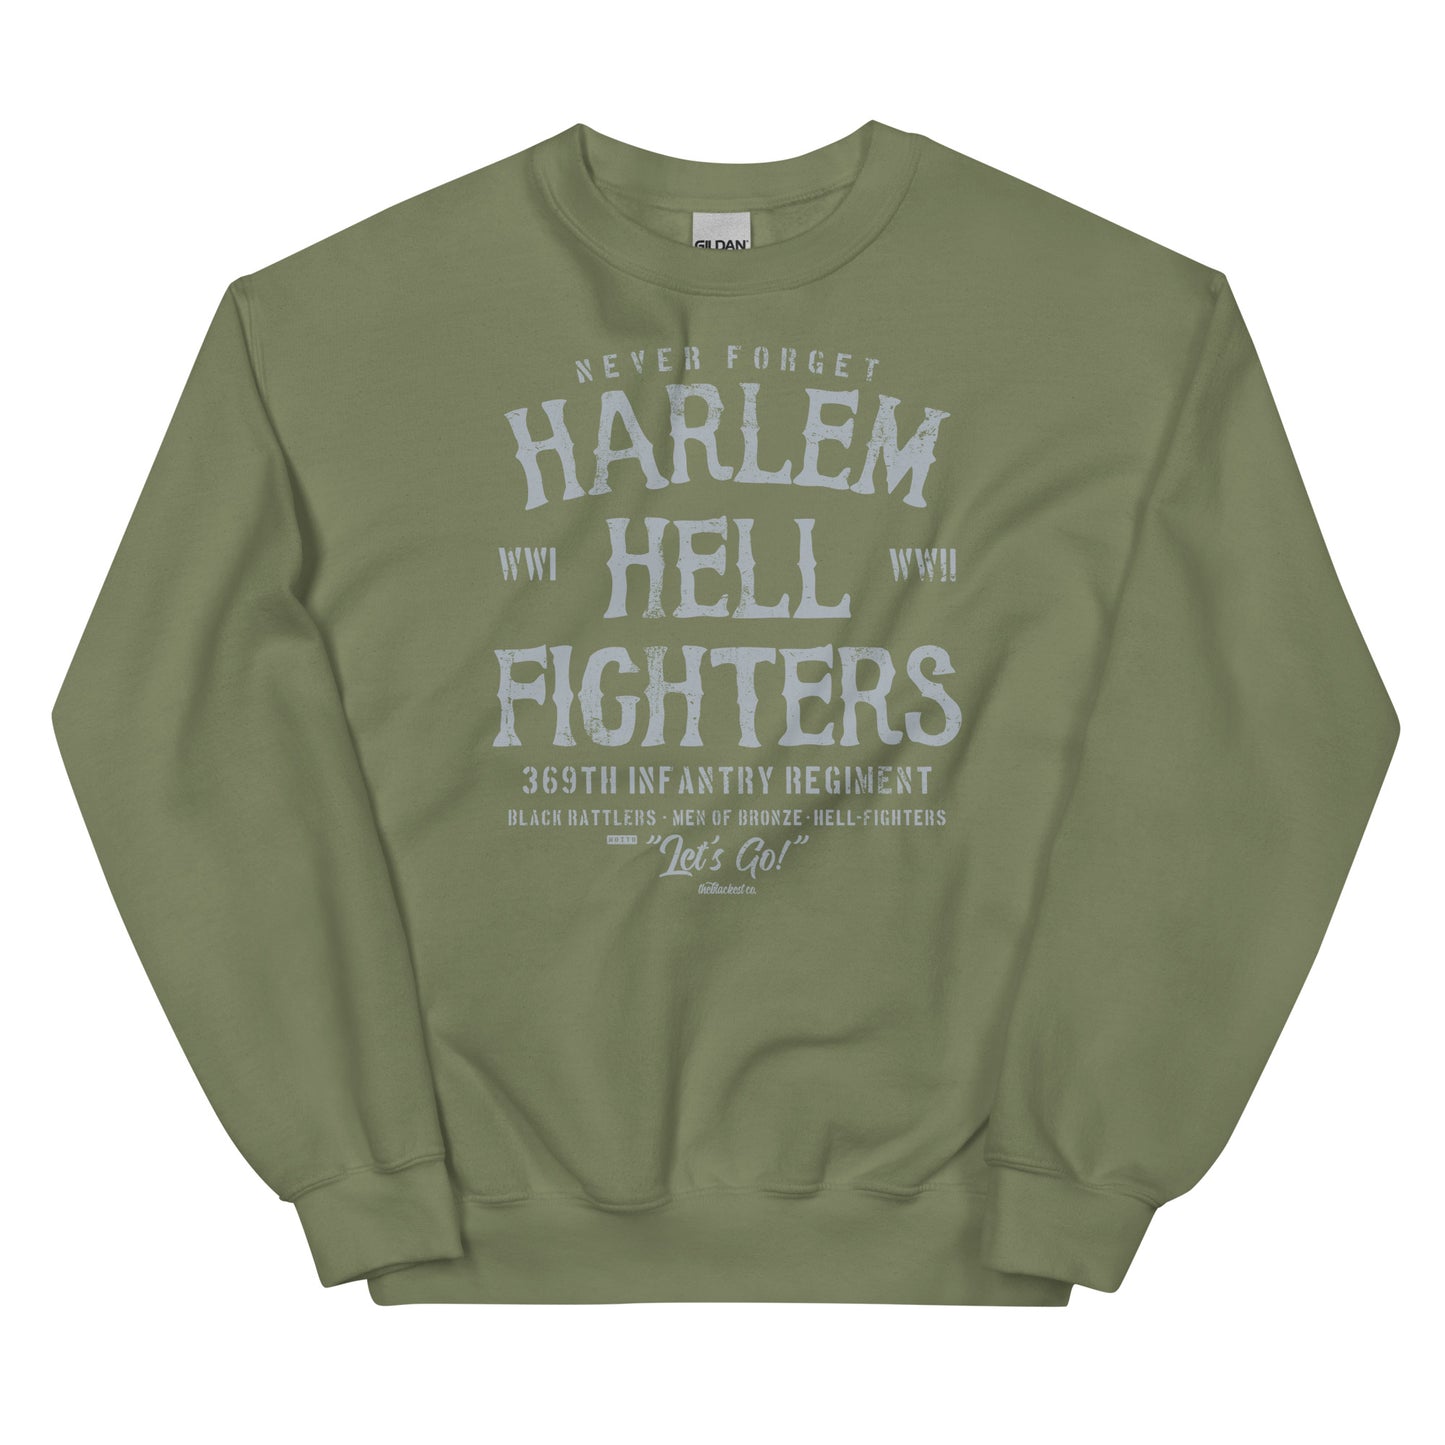 army green sweatshirt with white text reading harlem hellfighters